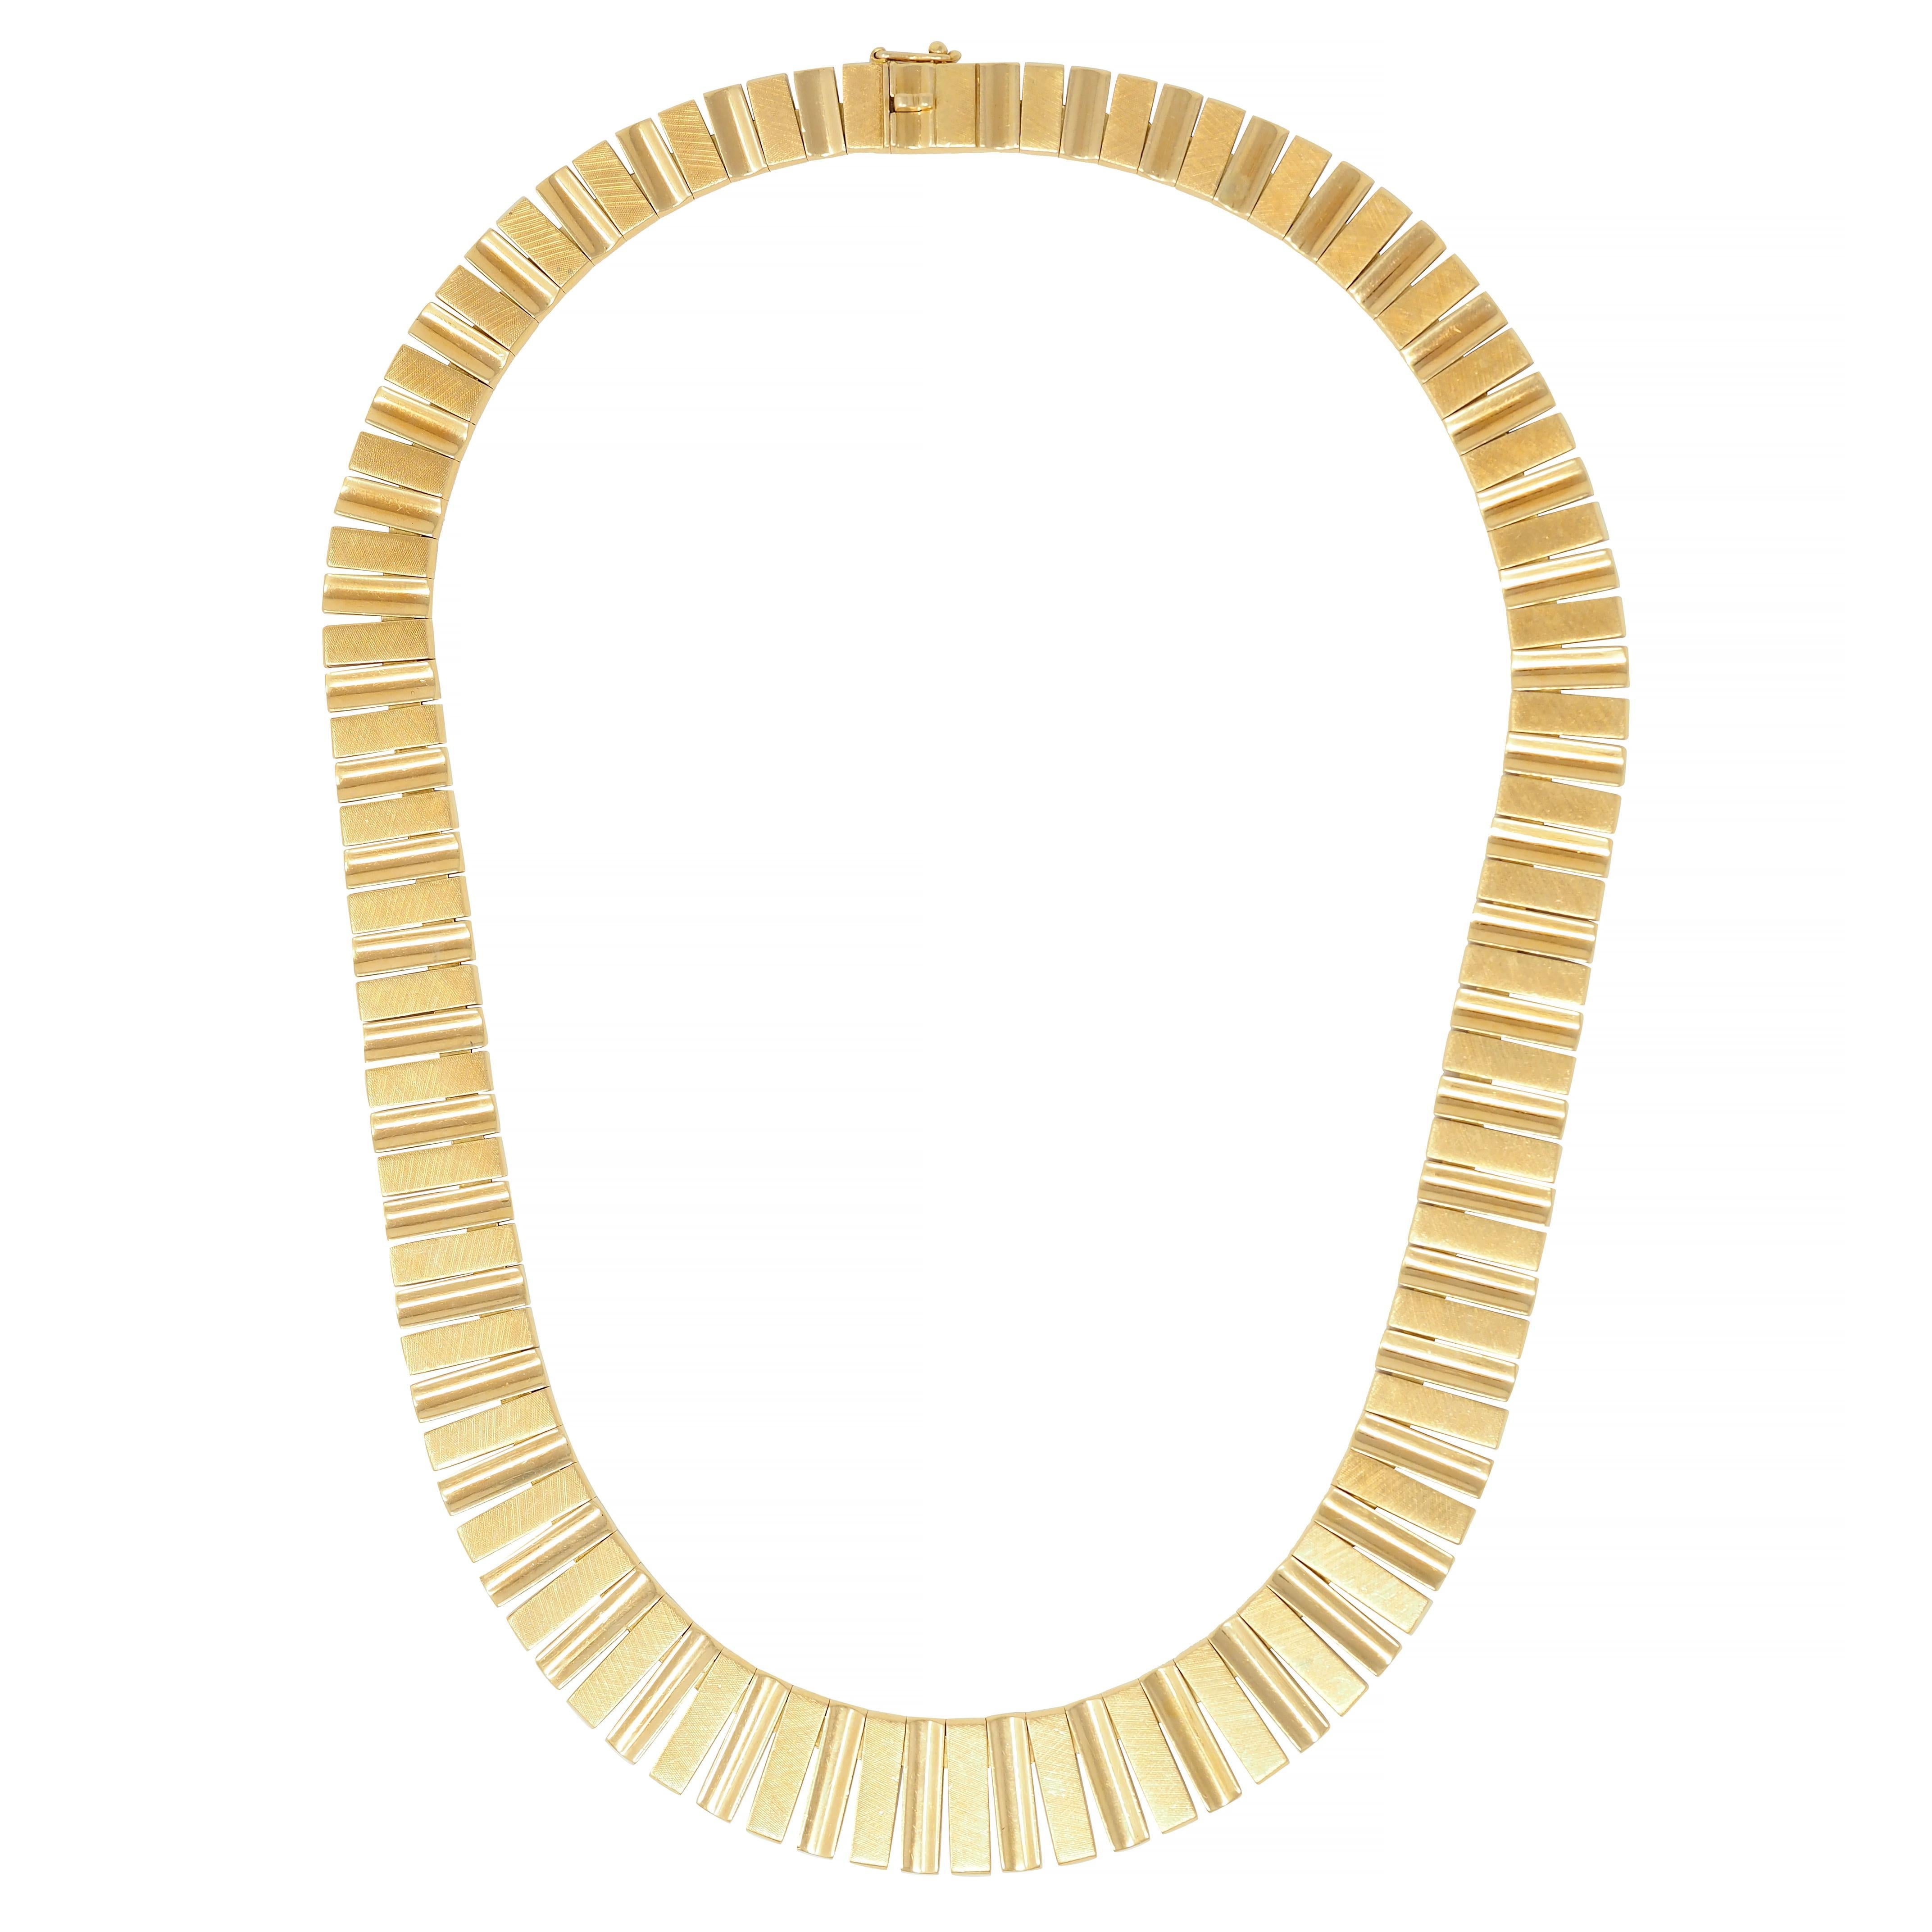 Comprised of graduated yellow gold rectangular-shaped links 
With alternating concave and flat tops creating a wave motif 
Concave links are high polished while flat links are textured
Engraved with a linear cross-hatch motif 
Completed by concealed